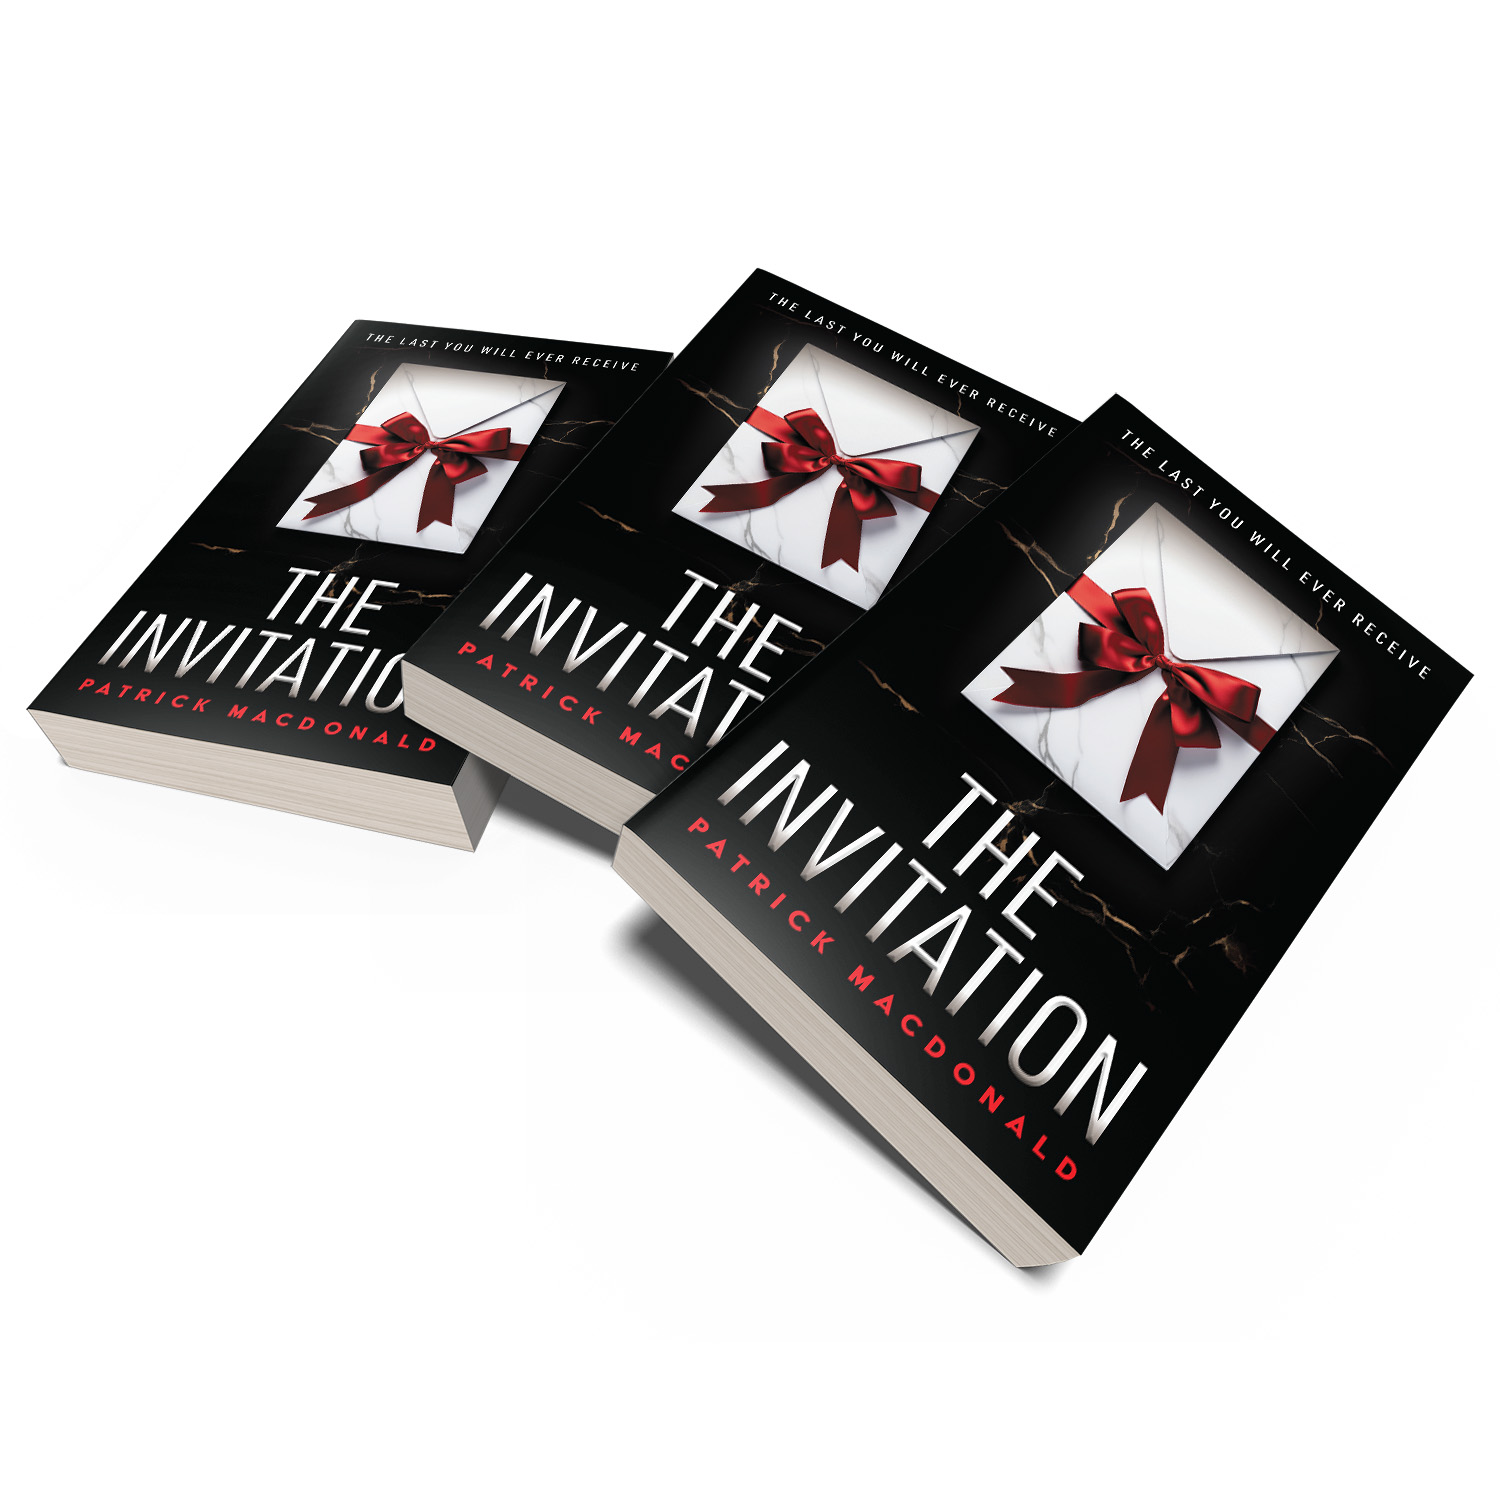 'The Invitation' is a dark, countdown-driven murder thriller by Patrick MacDonald. The book cover design and interior formatting are by Mark Thomas. To learn more about what Mark could do for your book, please visit coverness.com.